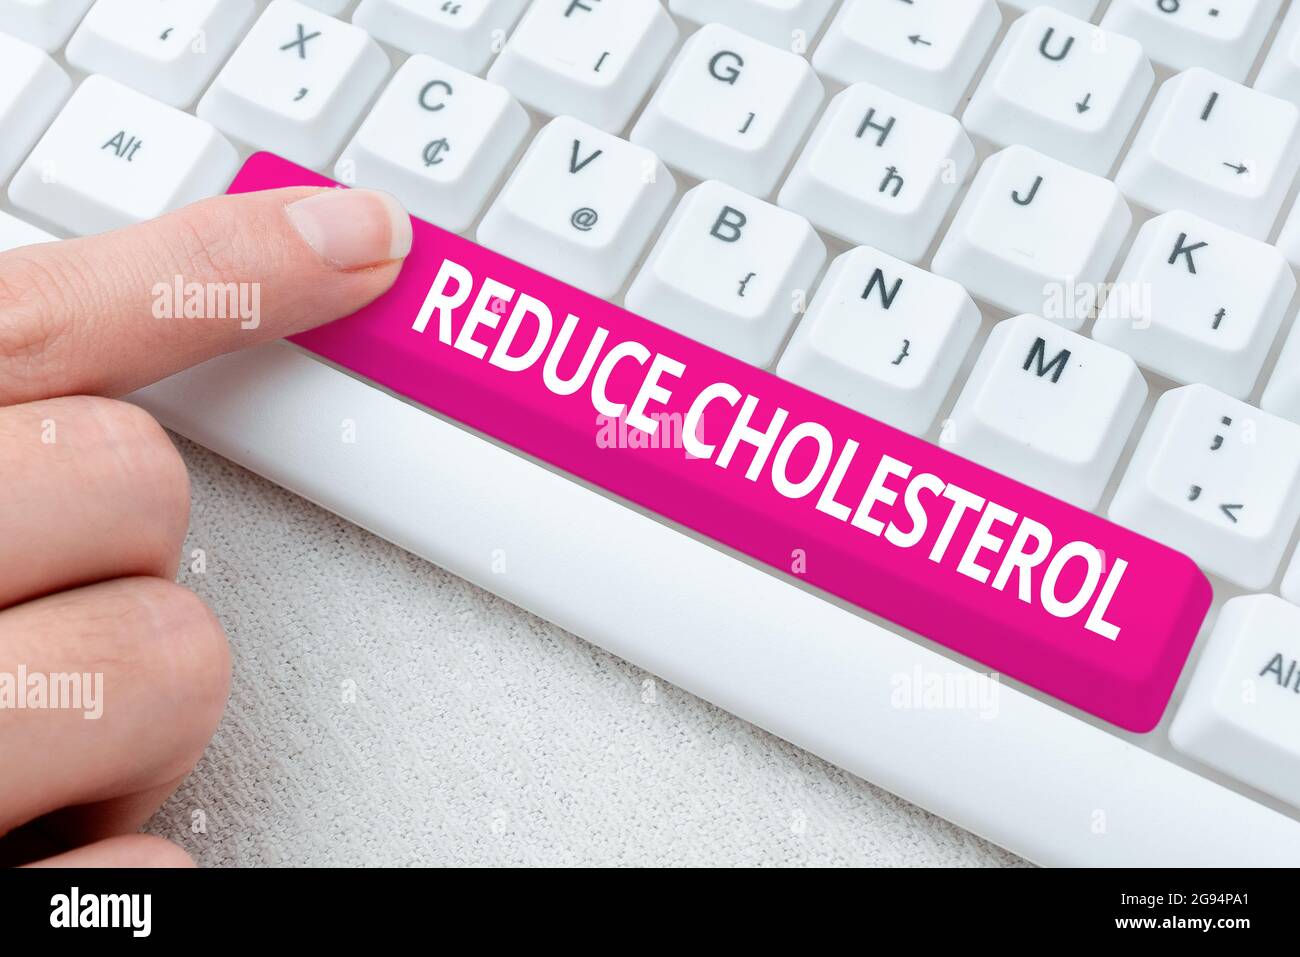 Sign displaying Reduce Cholesterol. Business concept lessen the intake of saturated fats in the diet Typing Difficult Program Codes, Writing New Stock Photo